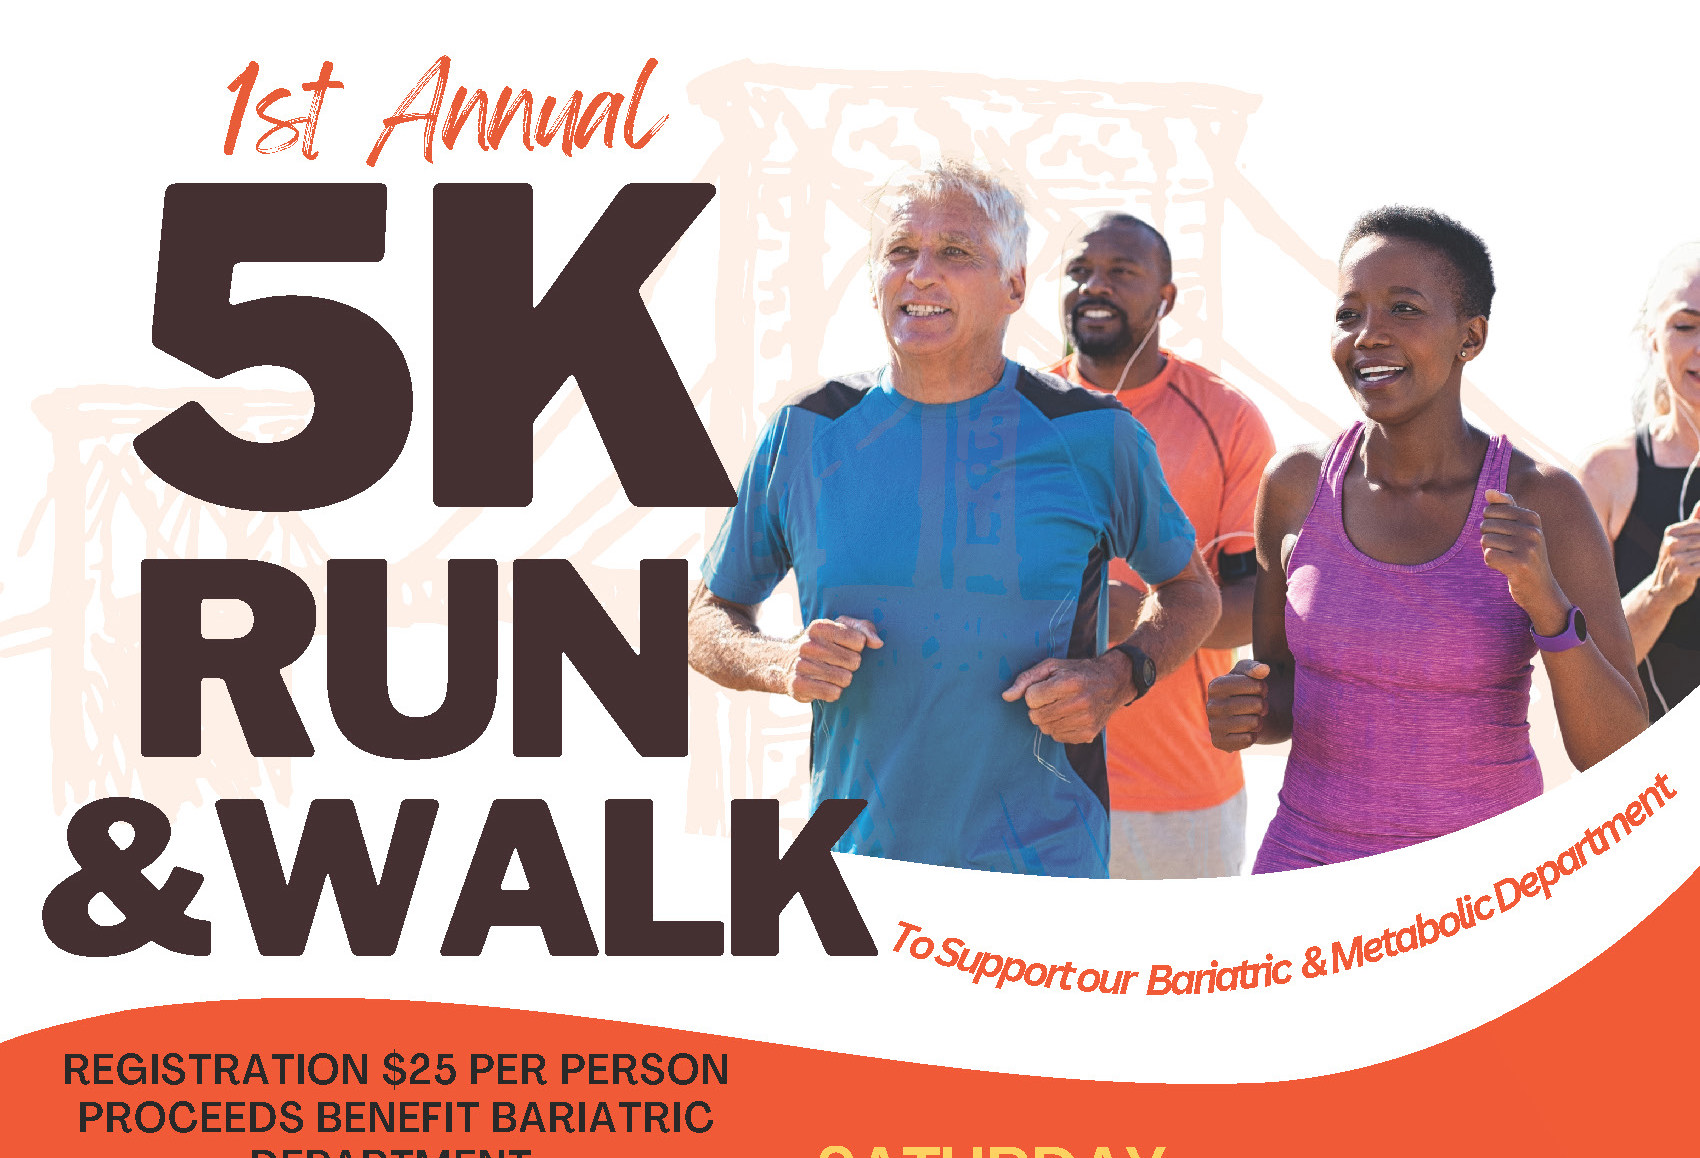 Join us for our first 5K Run and Walk to Support our Bariatric & Metabolic Department!